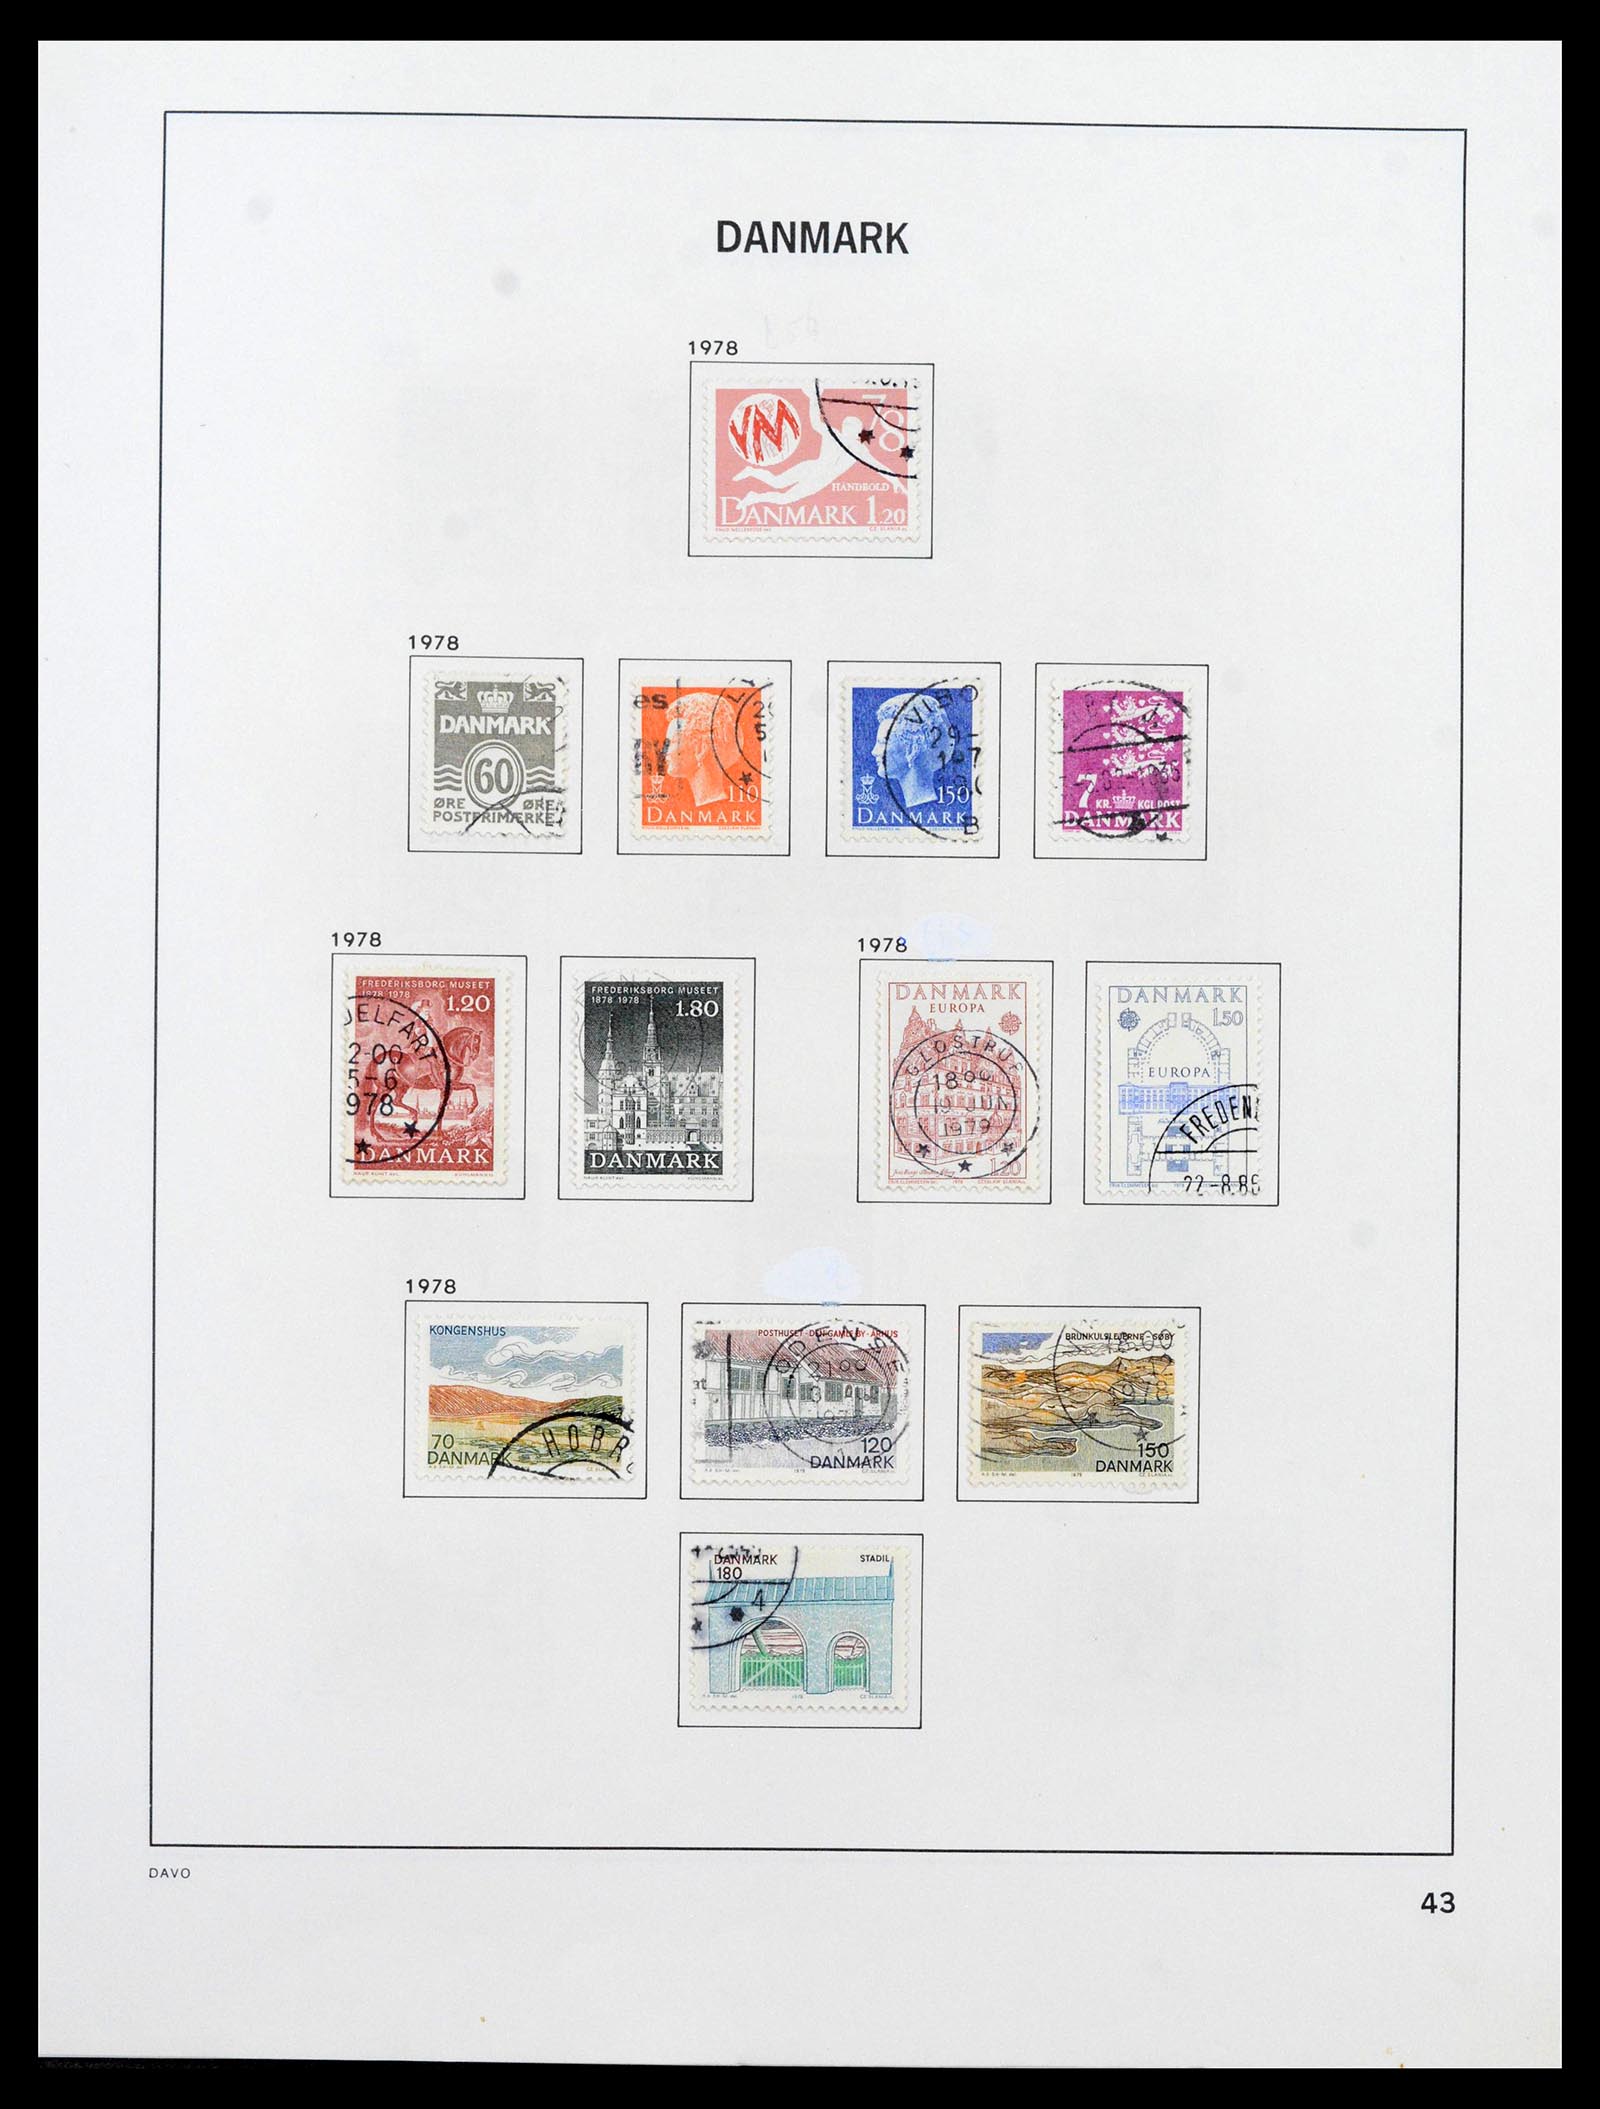 39428 0045 - Stamp collection 39428 Denmark 1851-2019.